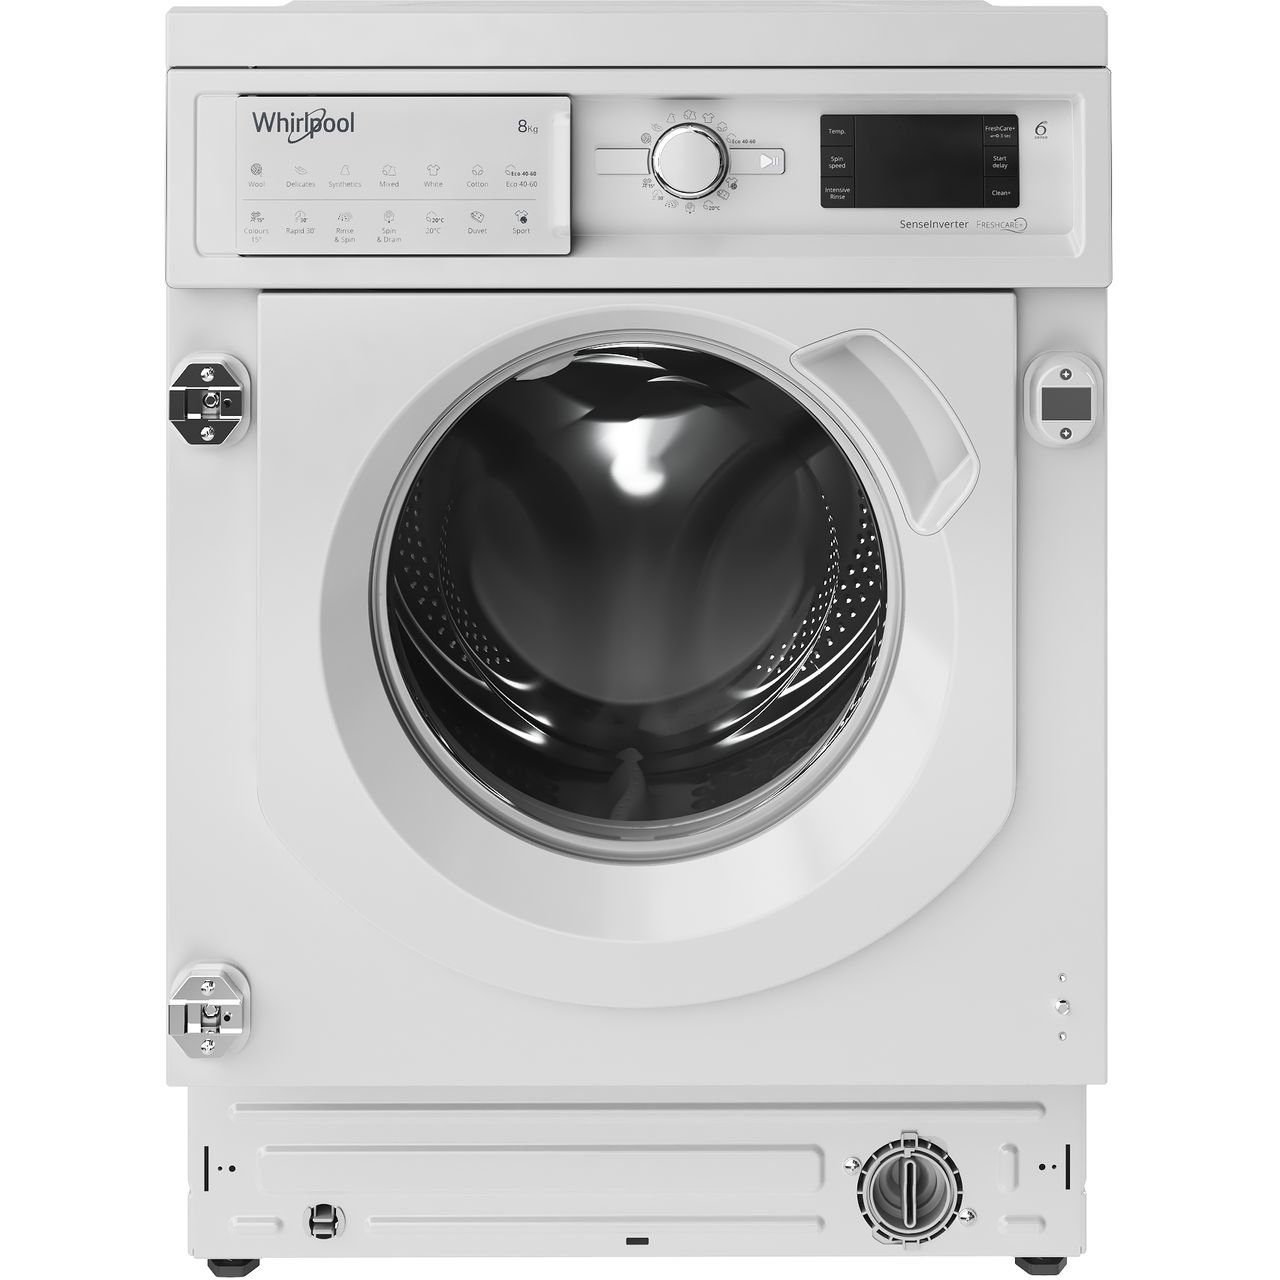 Whirlpool BIWMWG81484UK Integrated 8Kg Washing Machine with 1400 rpm Review